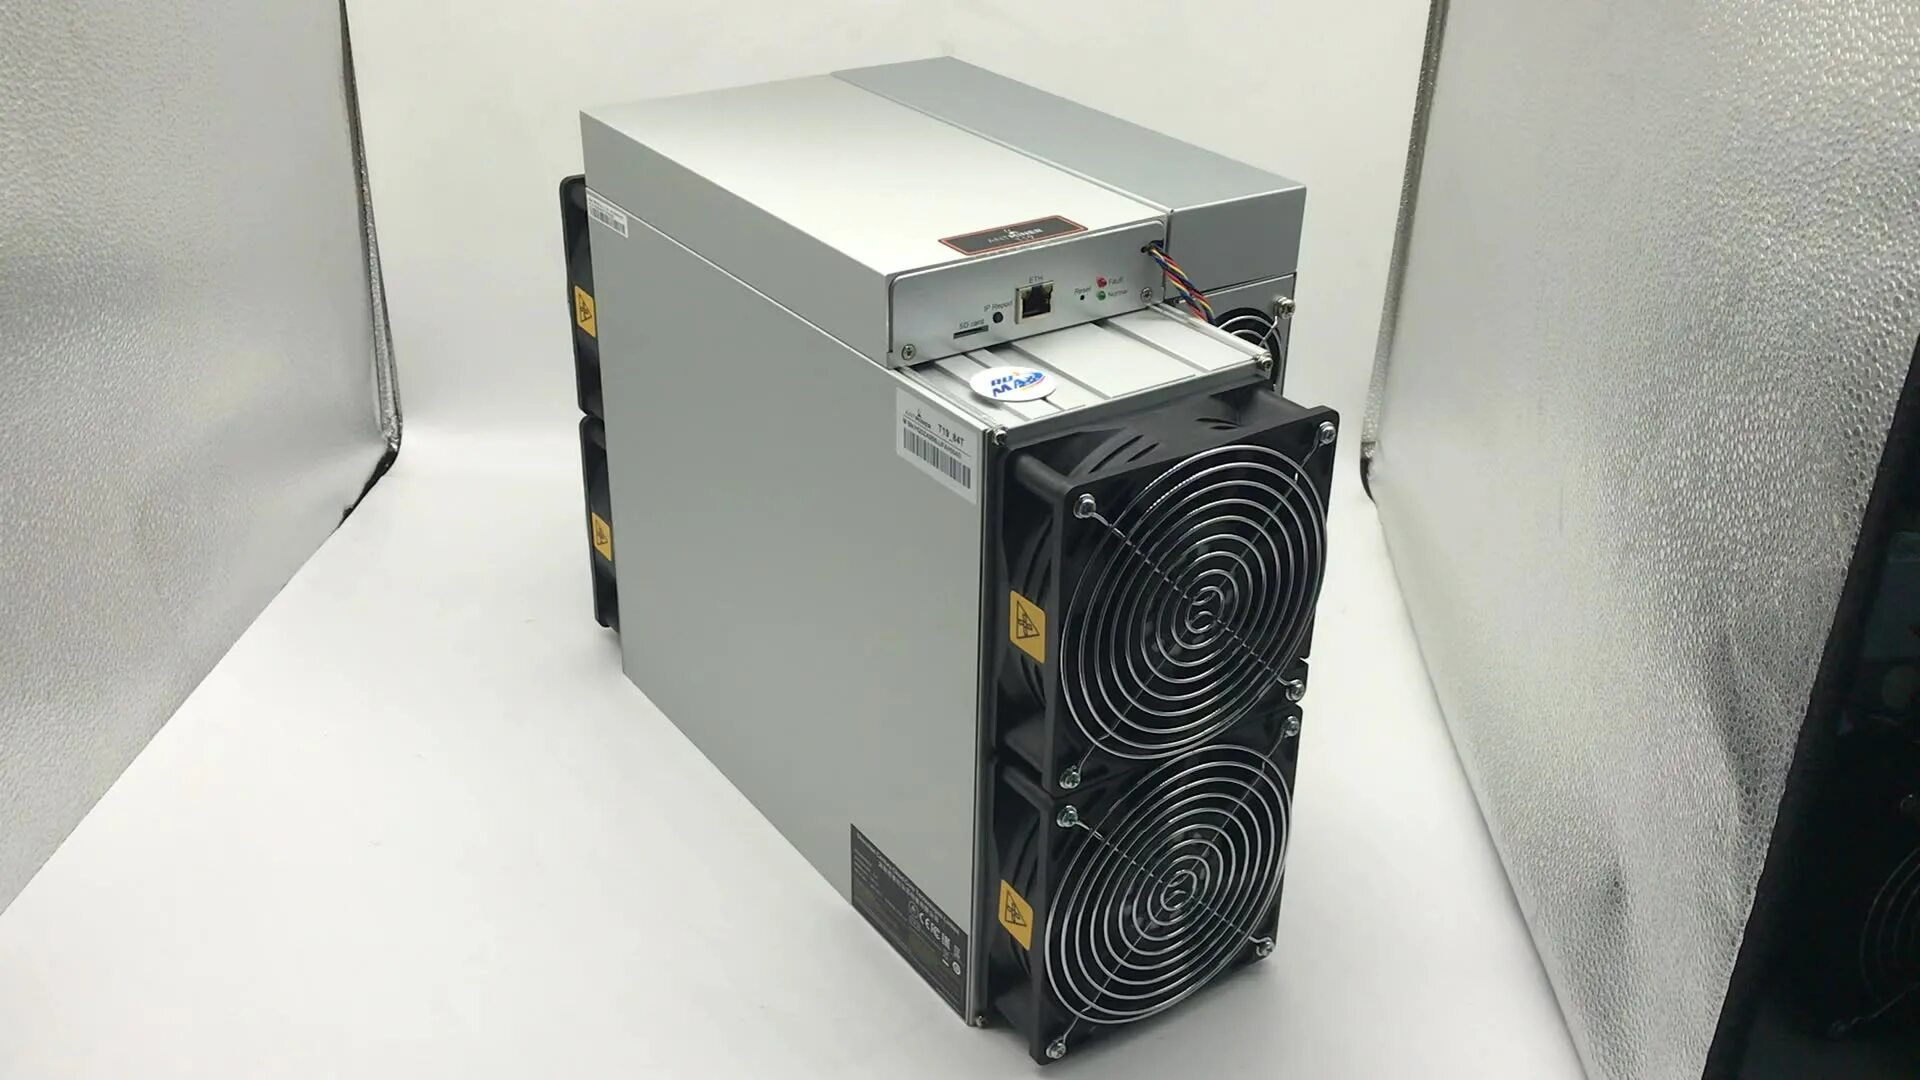 Antminer t21 190 th s. Antminer s19 Pro. ASIC Bitmain Antminer s19 Pro. Antminer s19 Pro 110. Bitmain Antminer s19 Pro 110th/s.